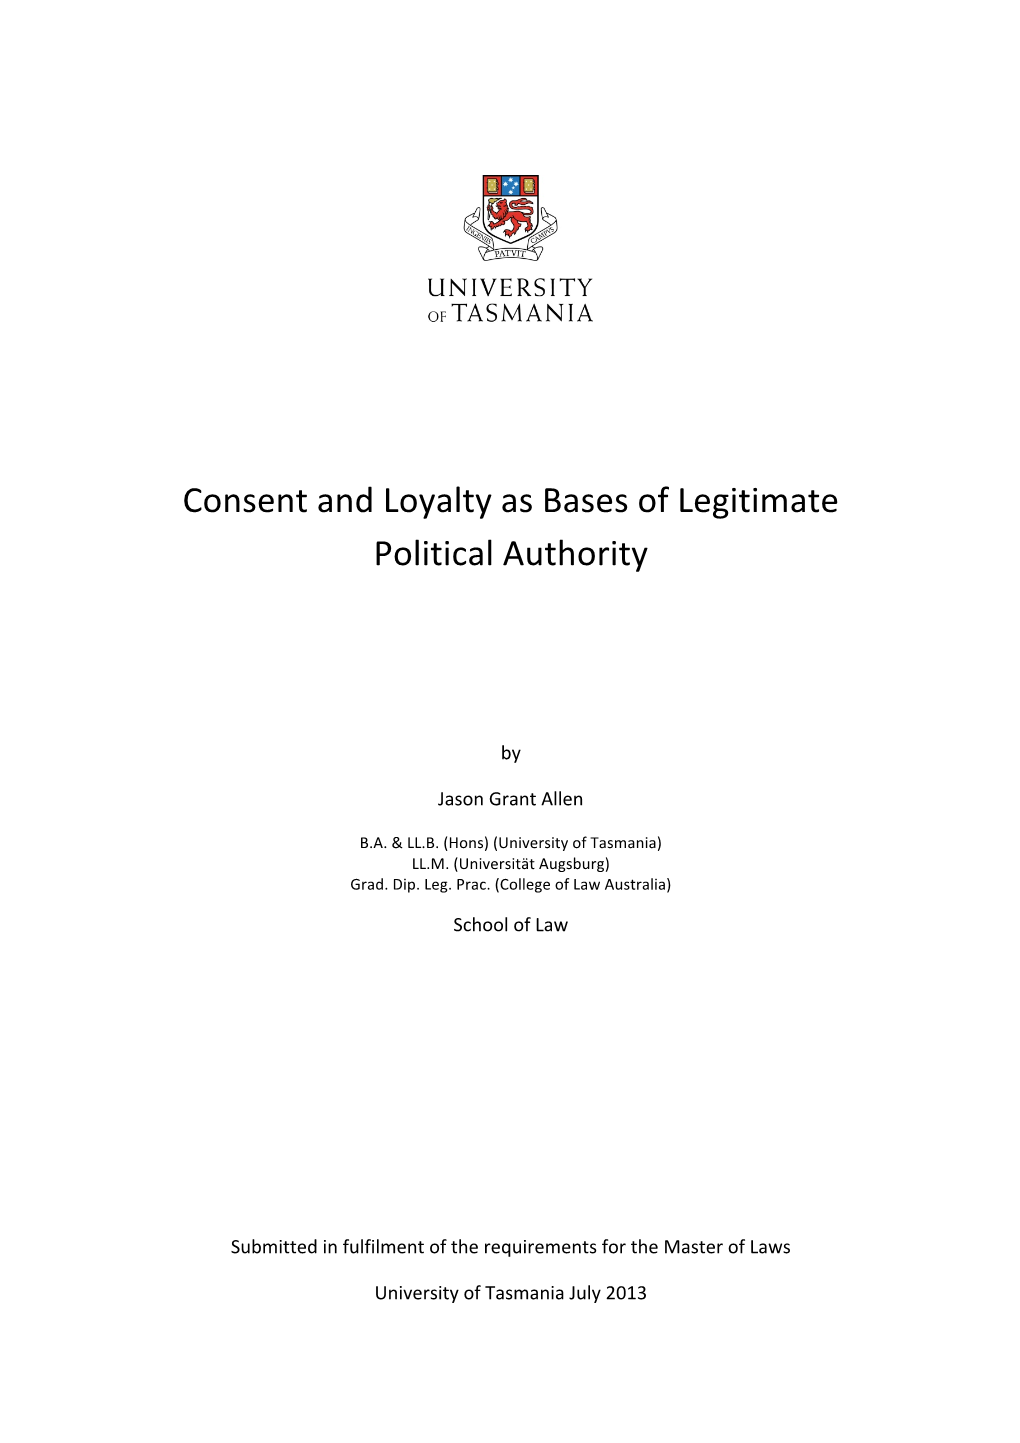 Consent and Loyalty As Bases of Legitimate Political Authority